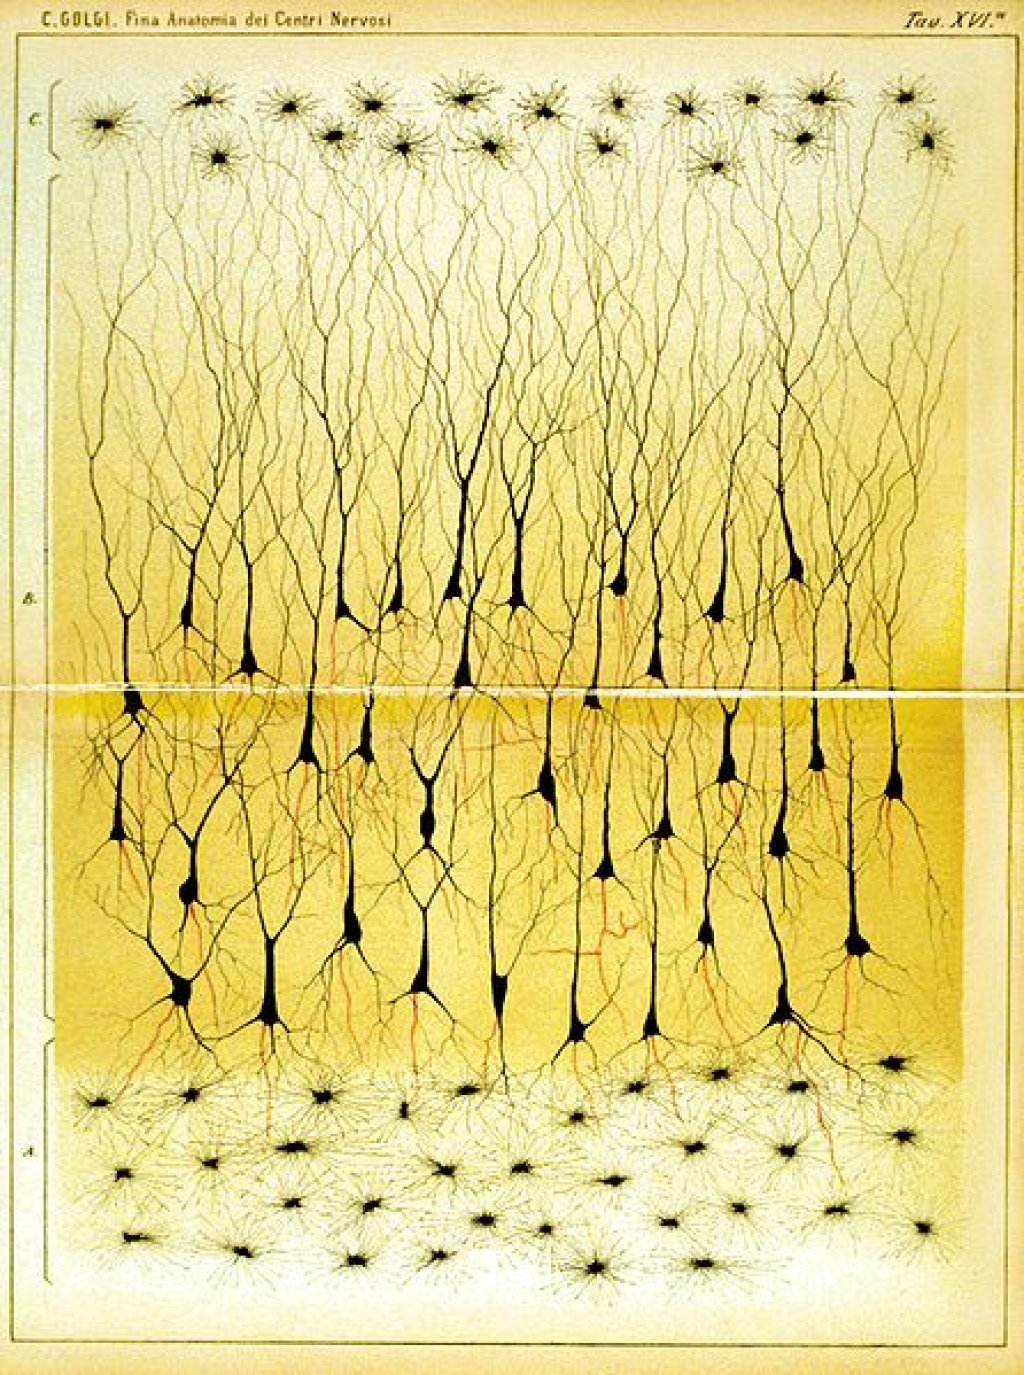 Nerve cells from the human hippocampus stained with silver nitrate, as hand-drawn by one of the founding fathers of neuroscience, Camillo Golgi, back in 1673.